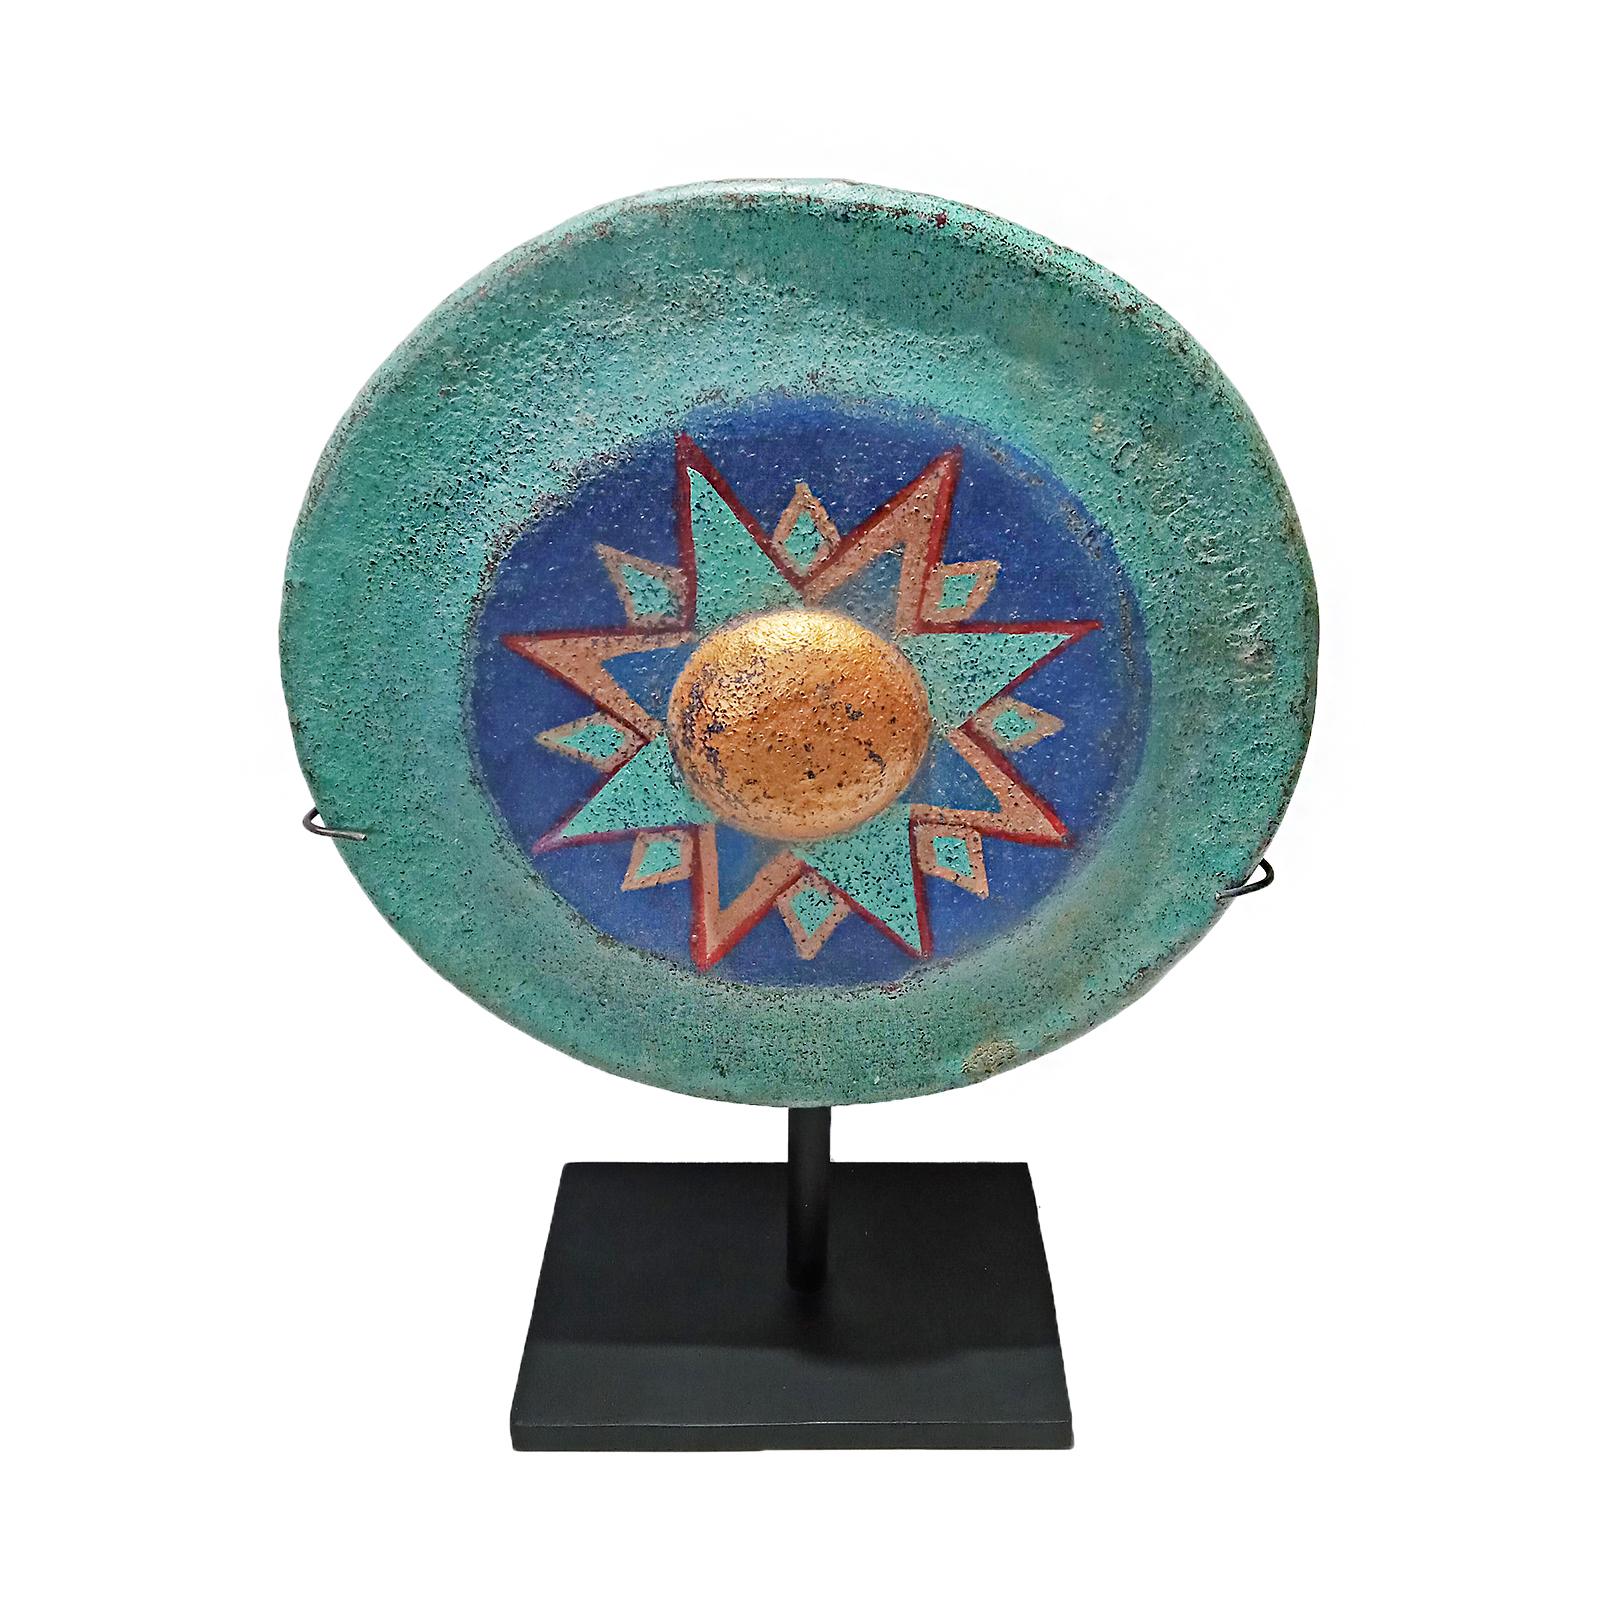 A vintage Indonesian gong, polychromed and repurposed for a freestanding sculpture. Mounted on a black metal stand. Circa 1940.  The front is painted in deep, well affixed colors simulating a star. The back has been left in its natural condition,